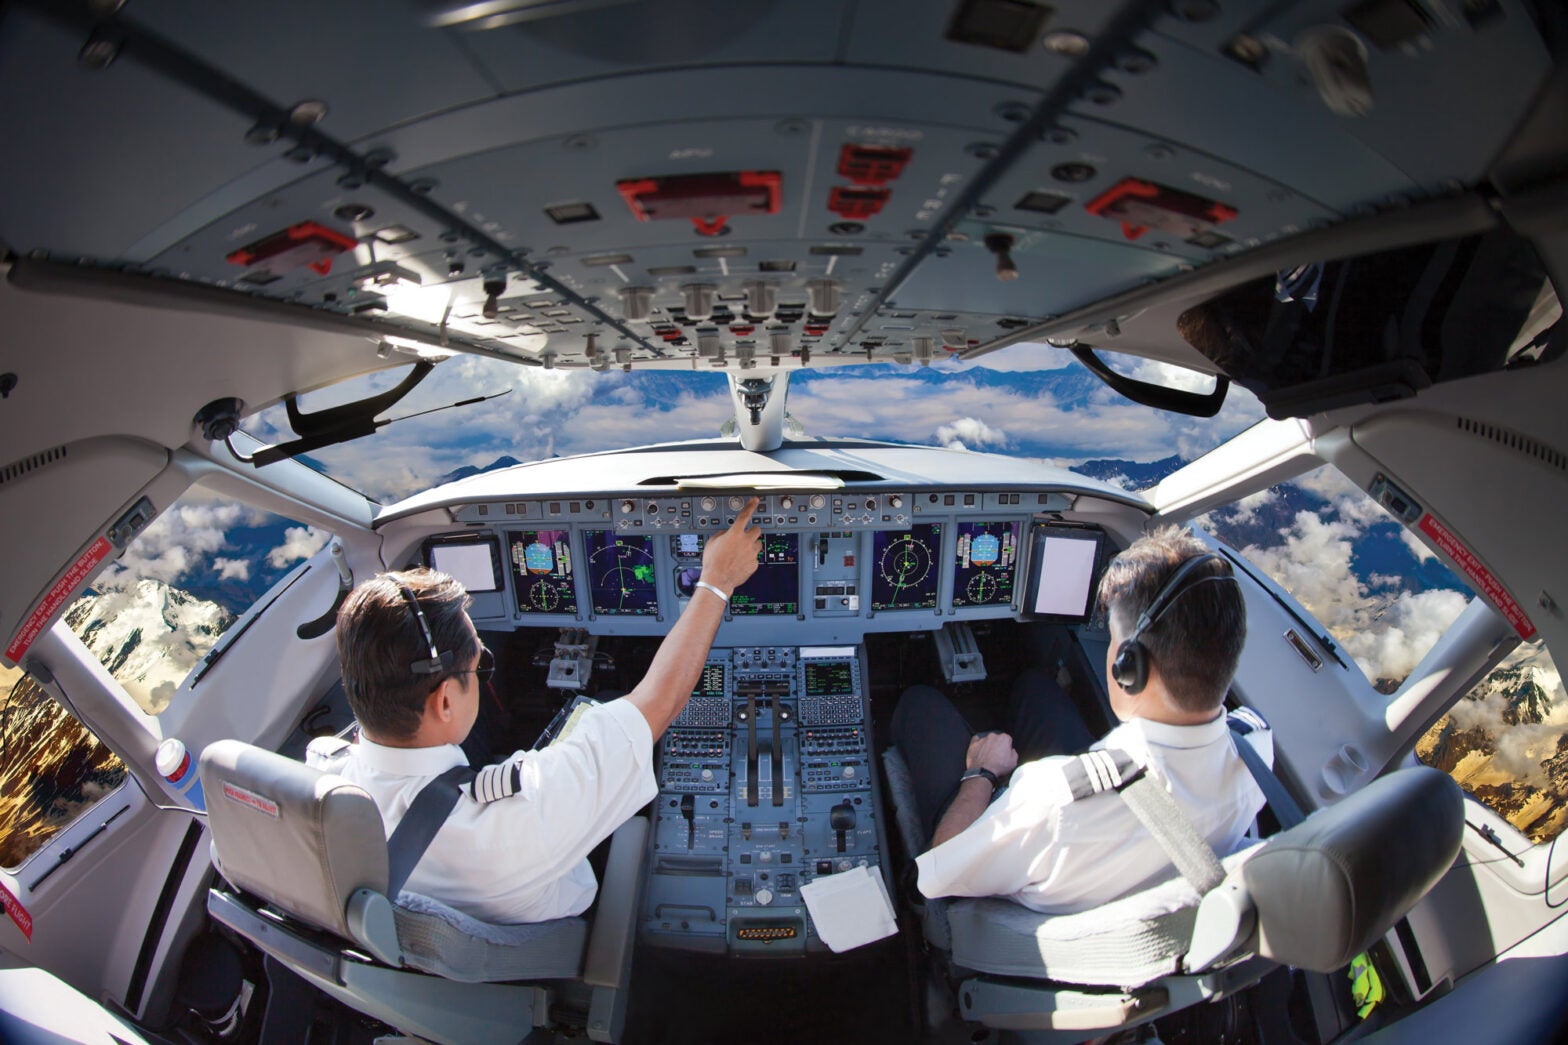 Should You Consider Becoming an Airline Pilot?